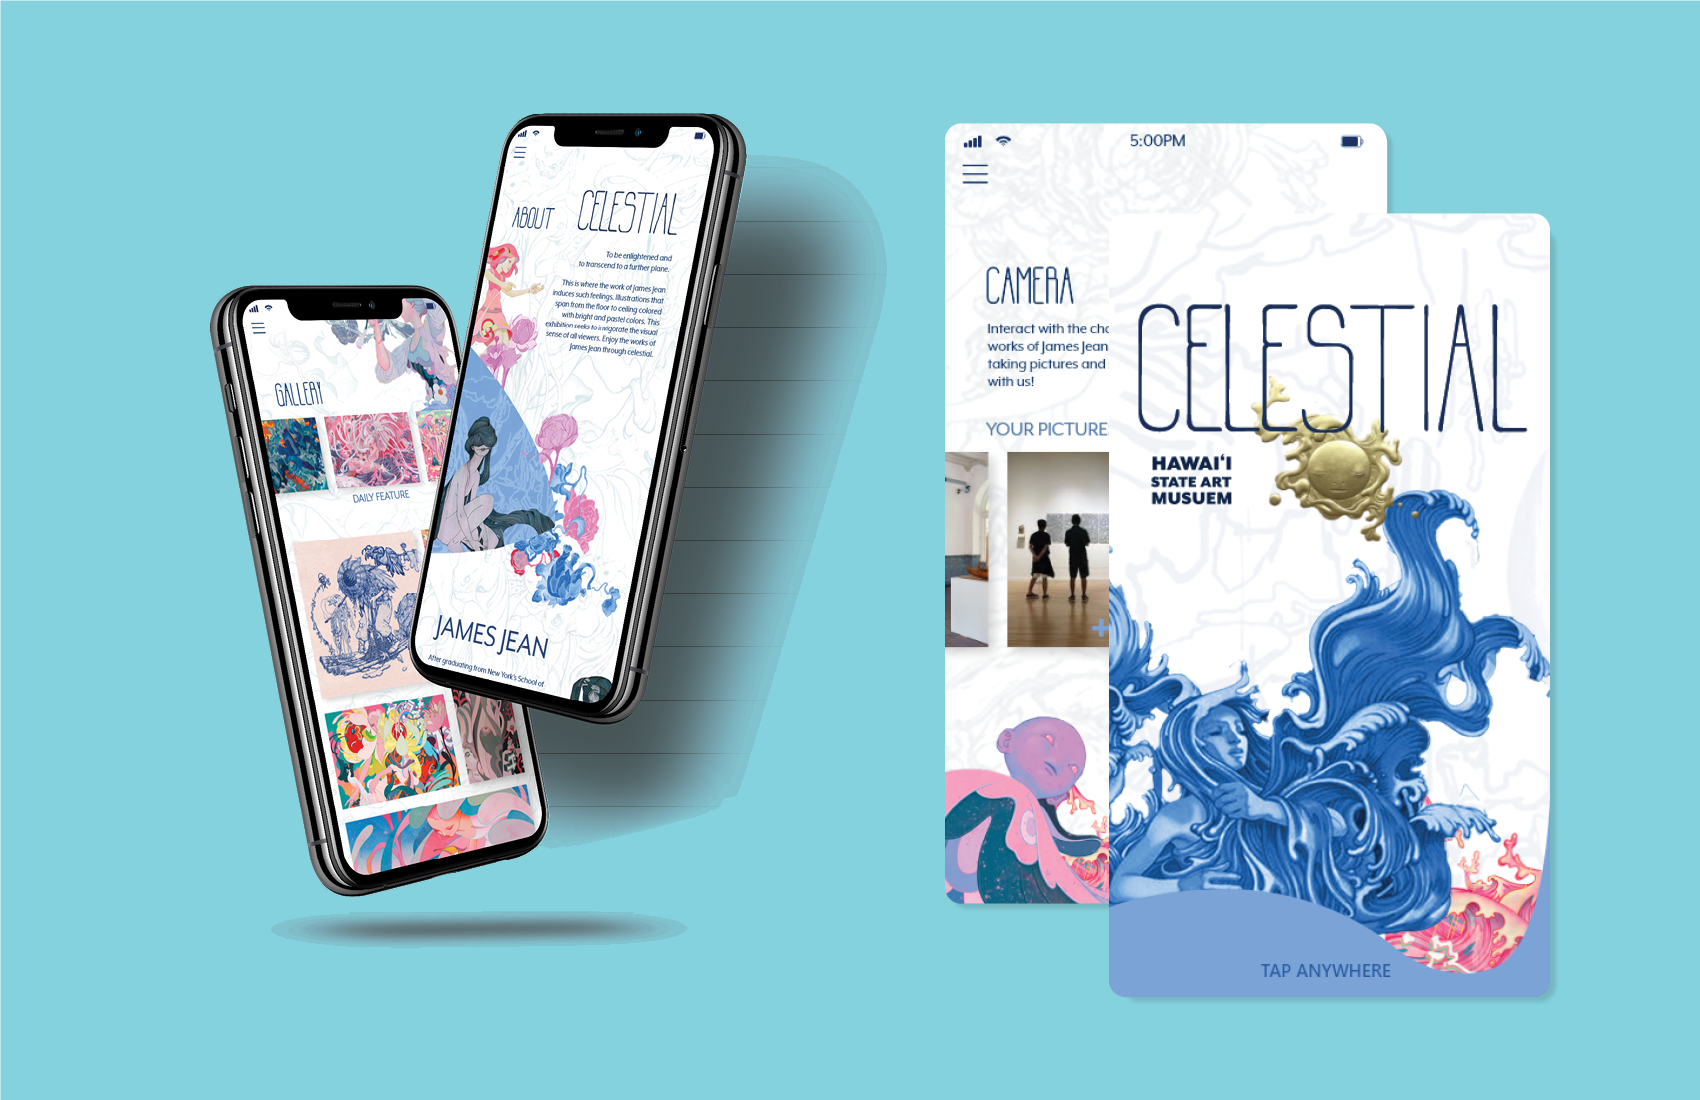 This is an app for the proposed Exhibition for the artist James Jean. 